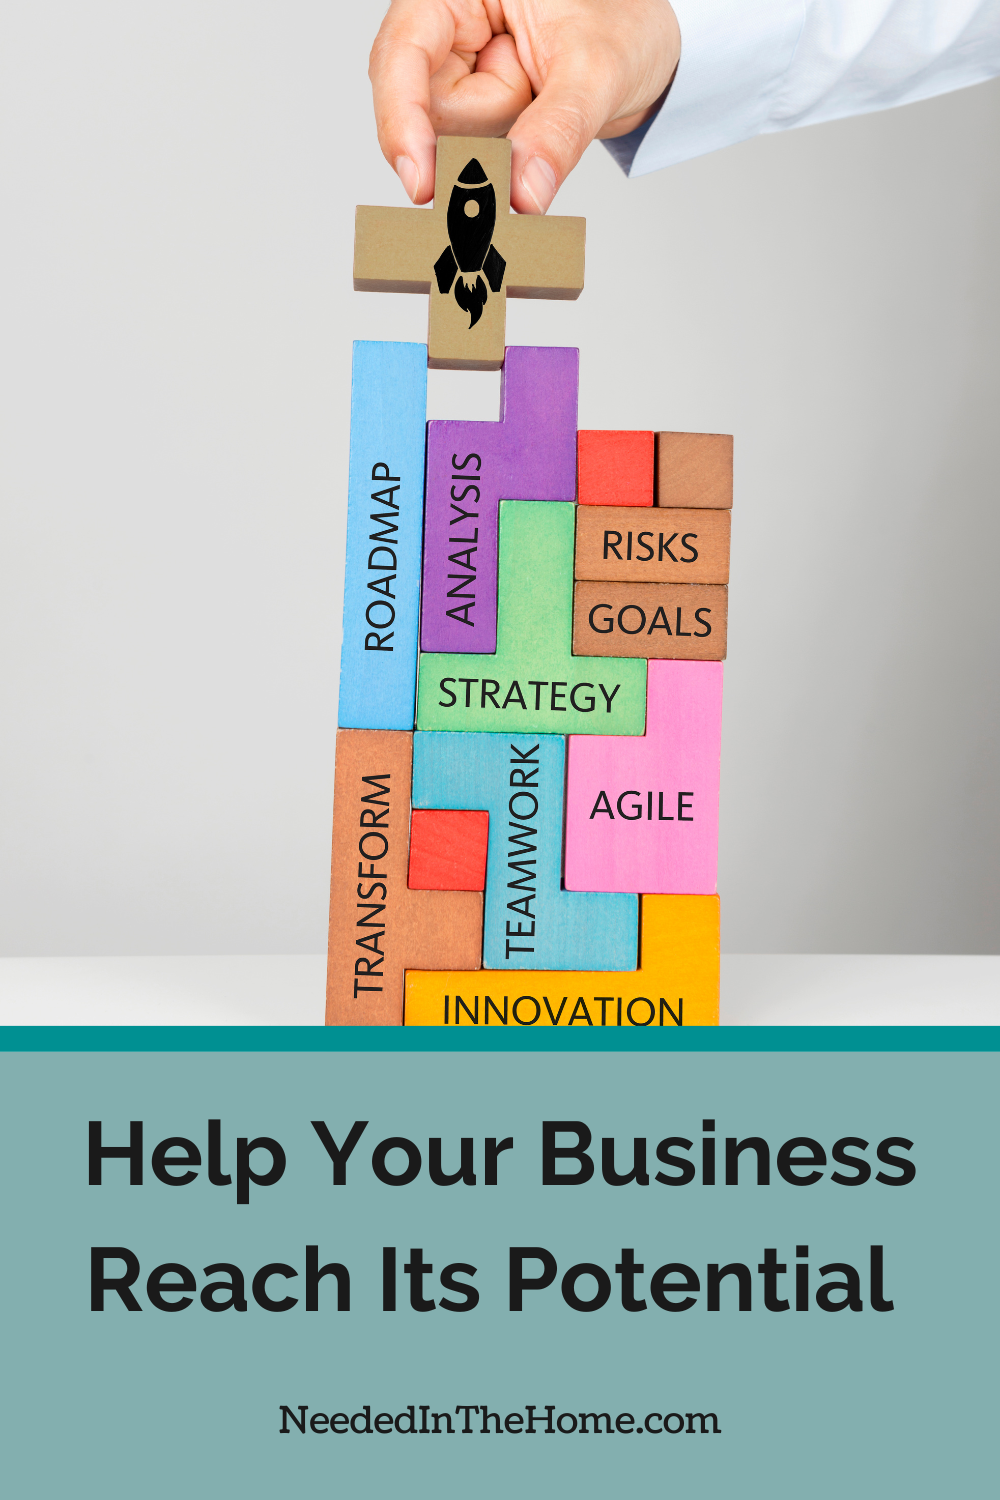 hand stacking colorful blocks with rocket image and words roadmap analysis risks goals strategy transform teamwork agile innovation help your business reach its potential neededinthehome